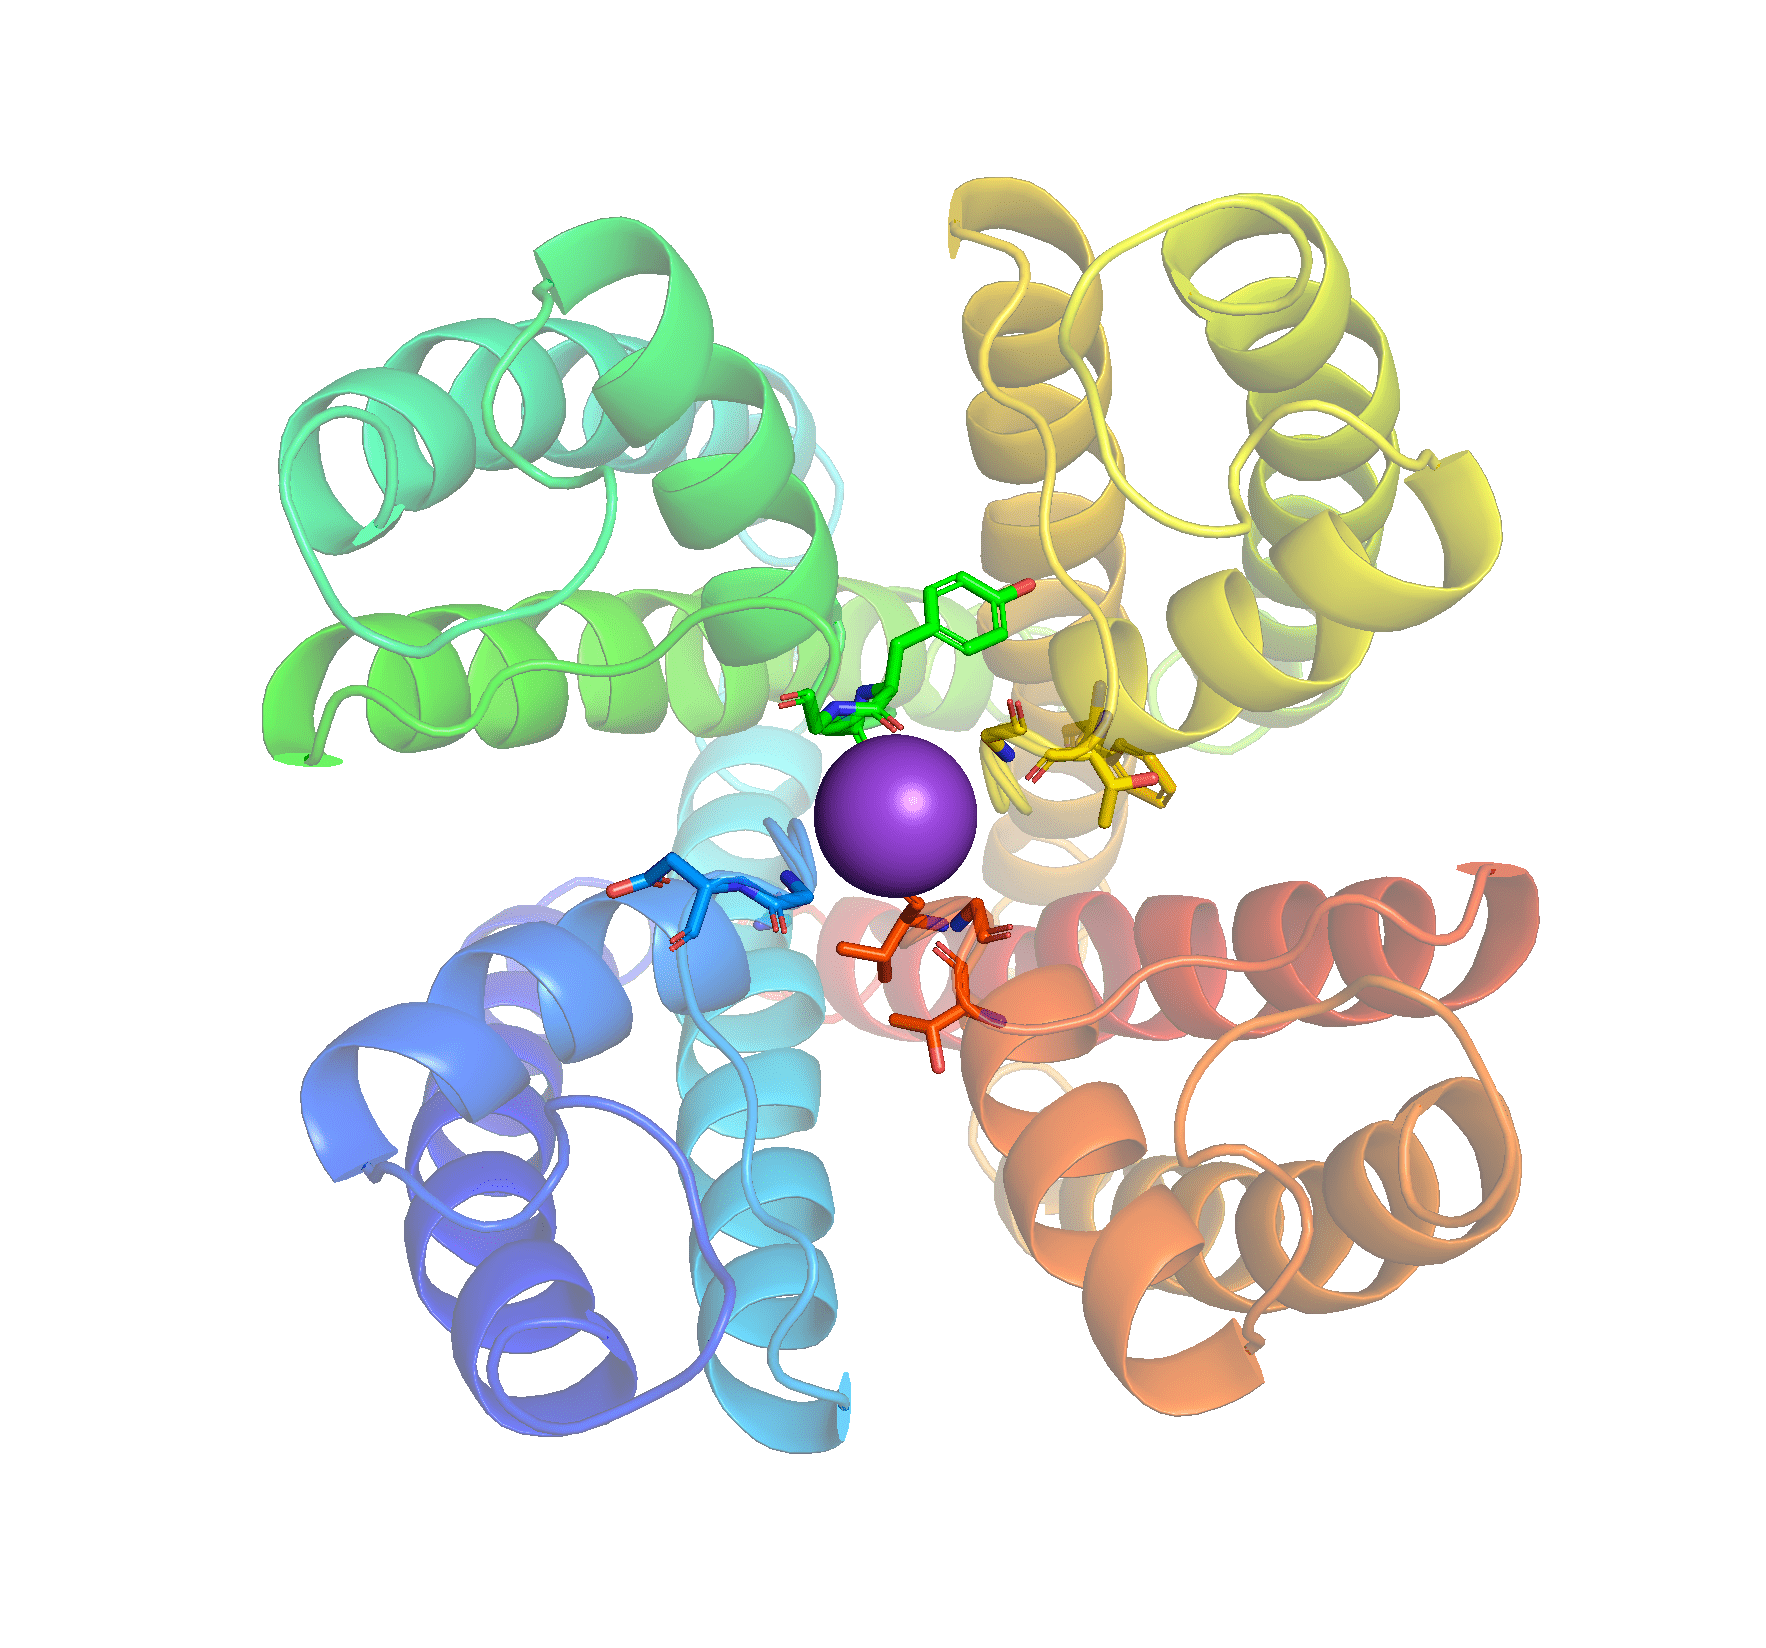 Exercise 0a - Showing proteins from their best side